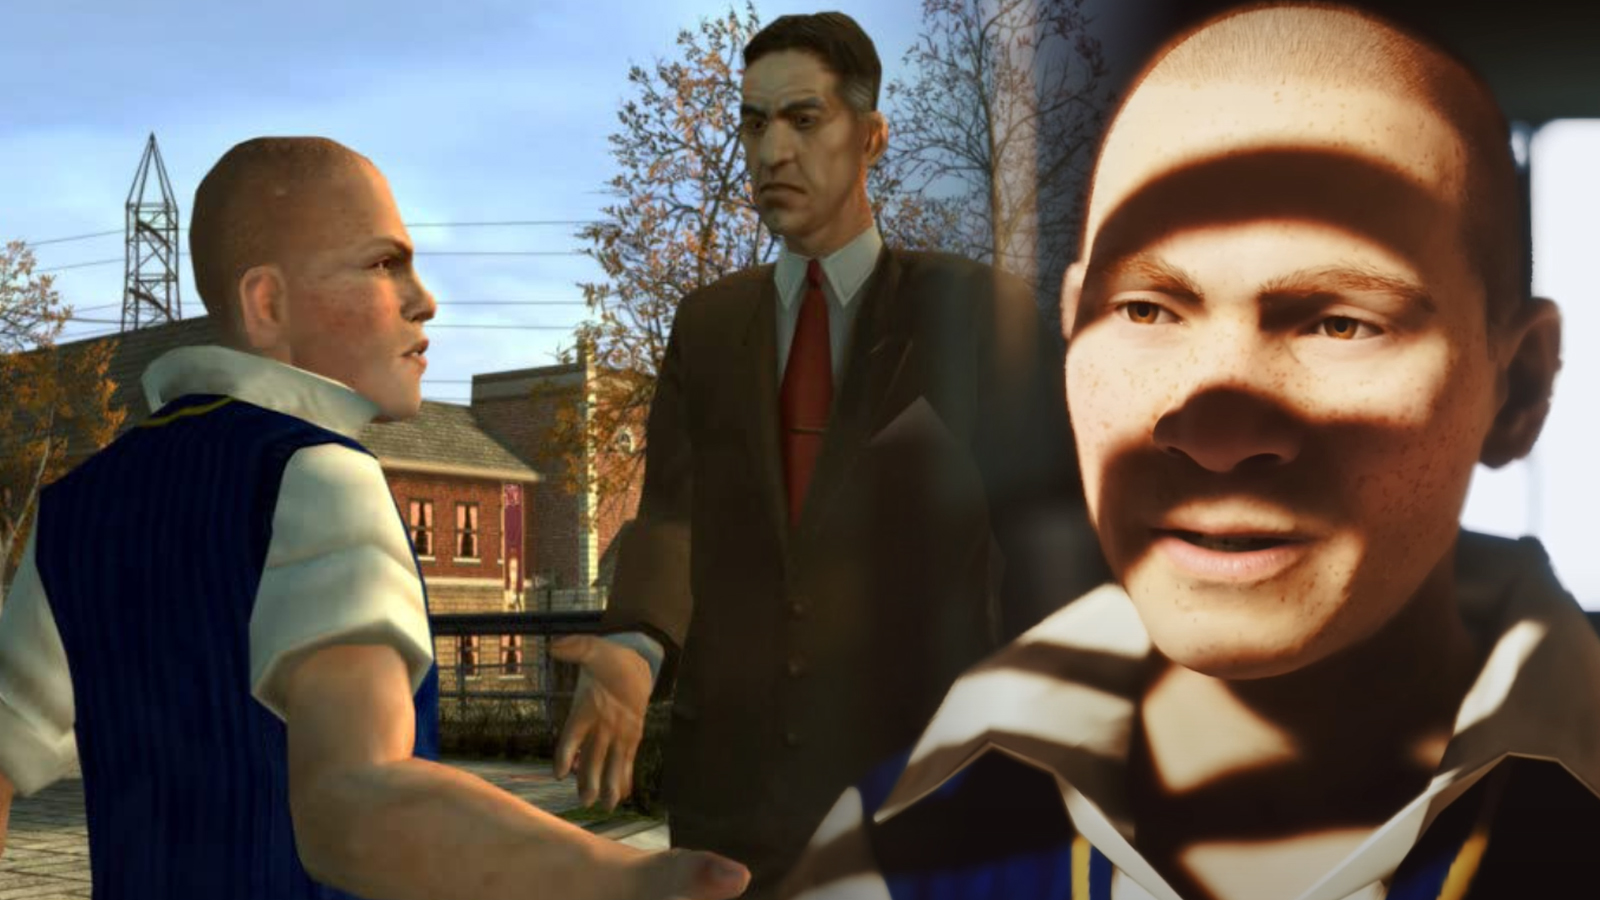 Gamers Newspaper on X: Recreation of the faces in Bully Remake in Unreal  Engine 5. Credits: Teaserplay #bullyremake #UnrealEngine5 #GamingNews  #RockstarGames  / X